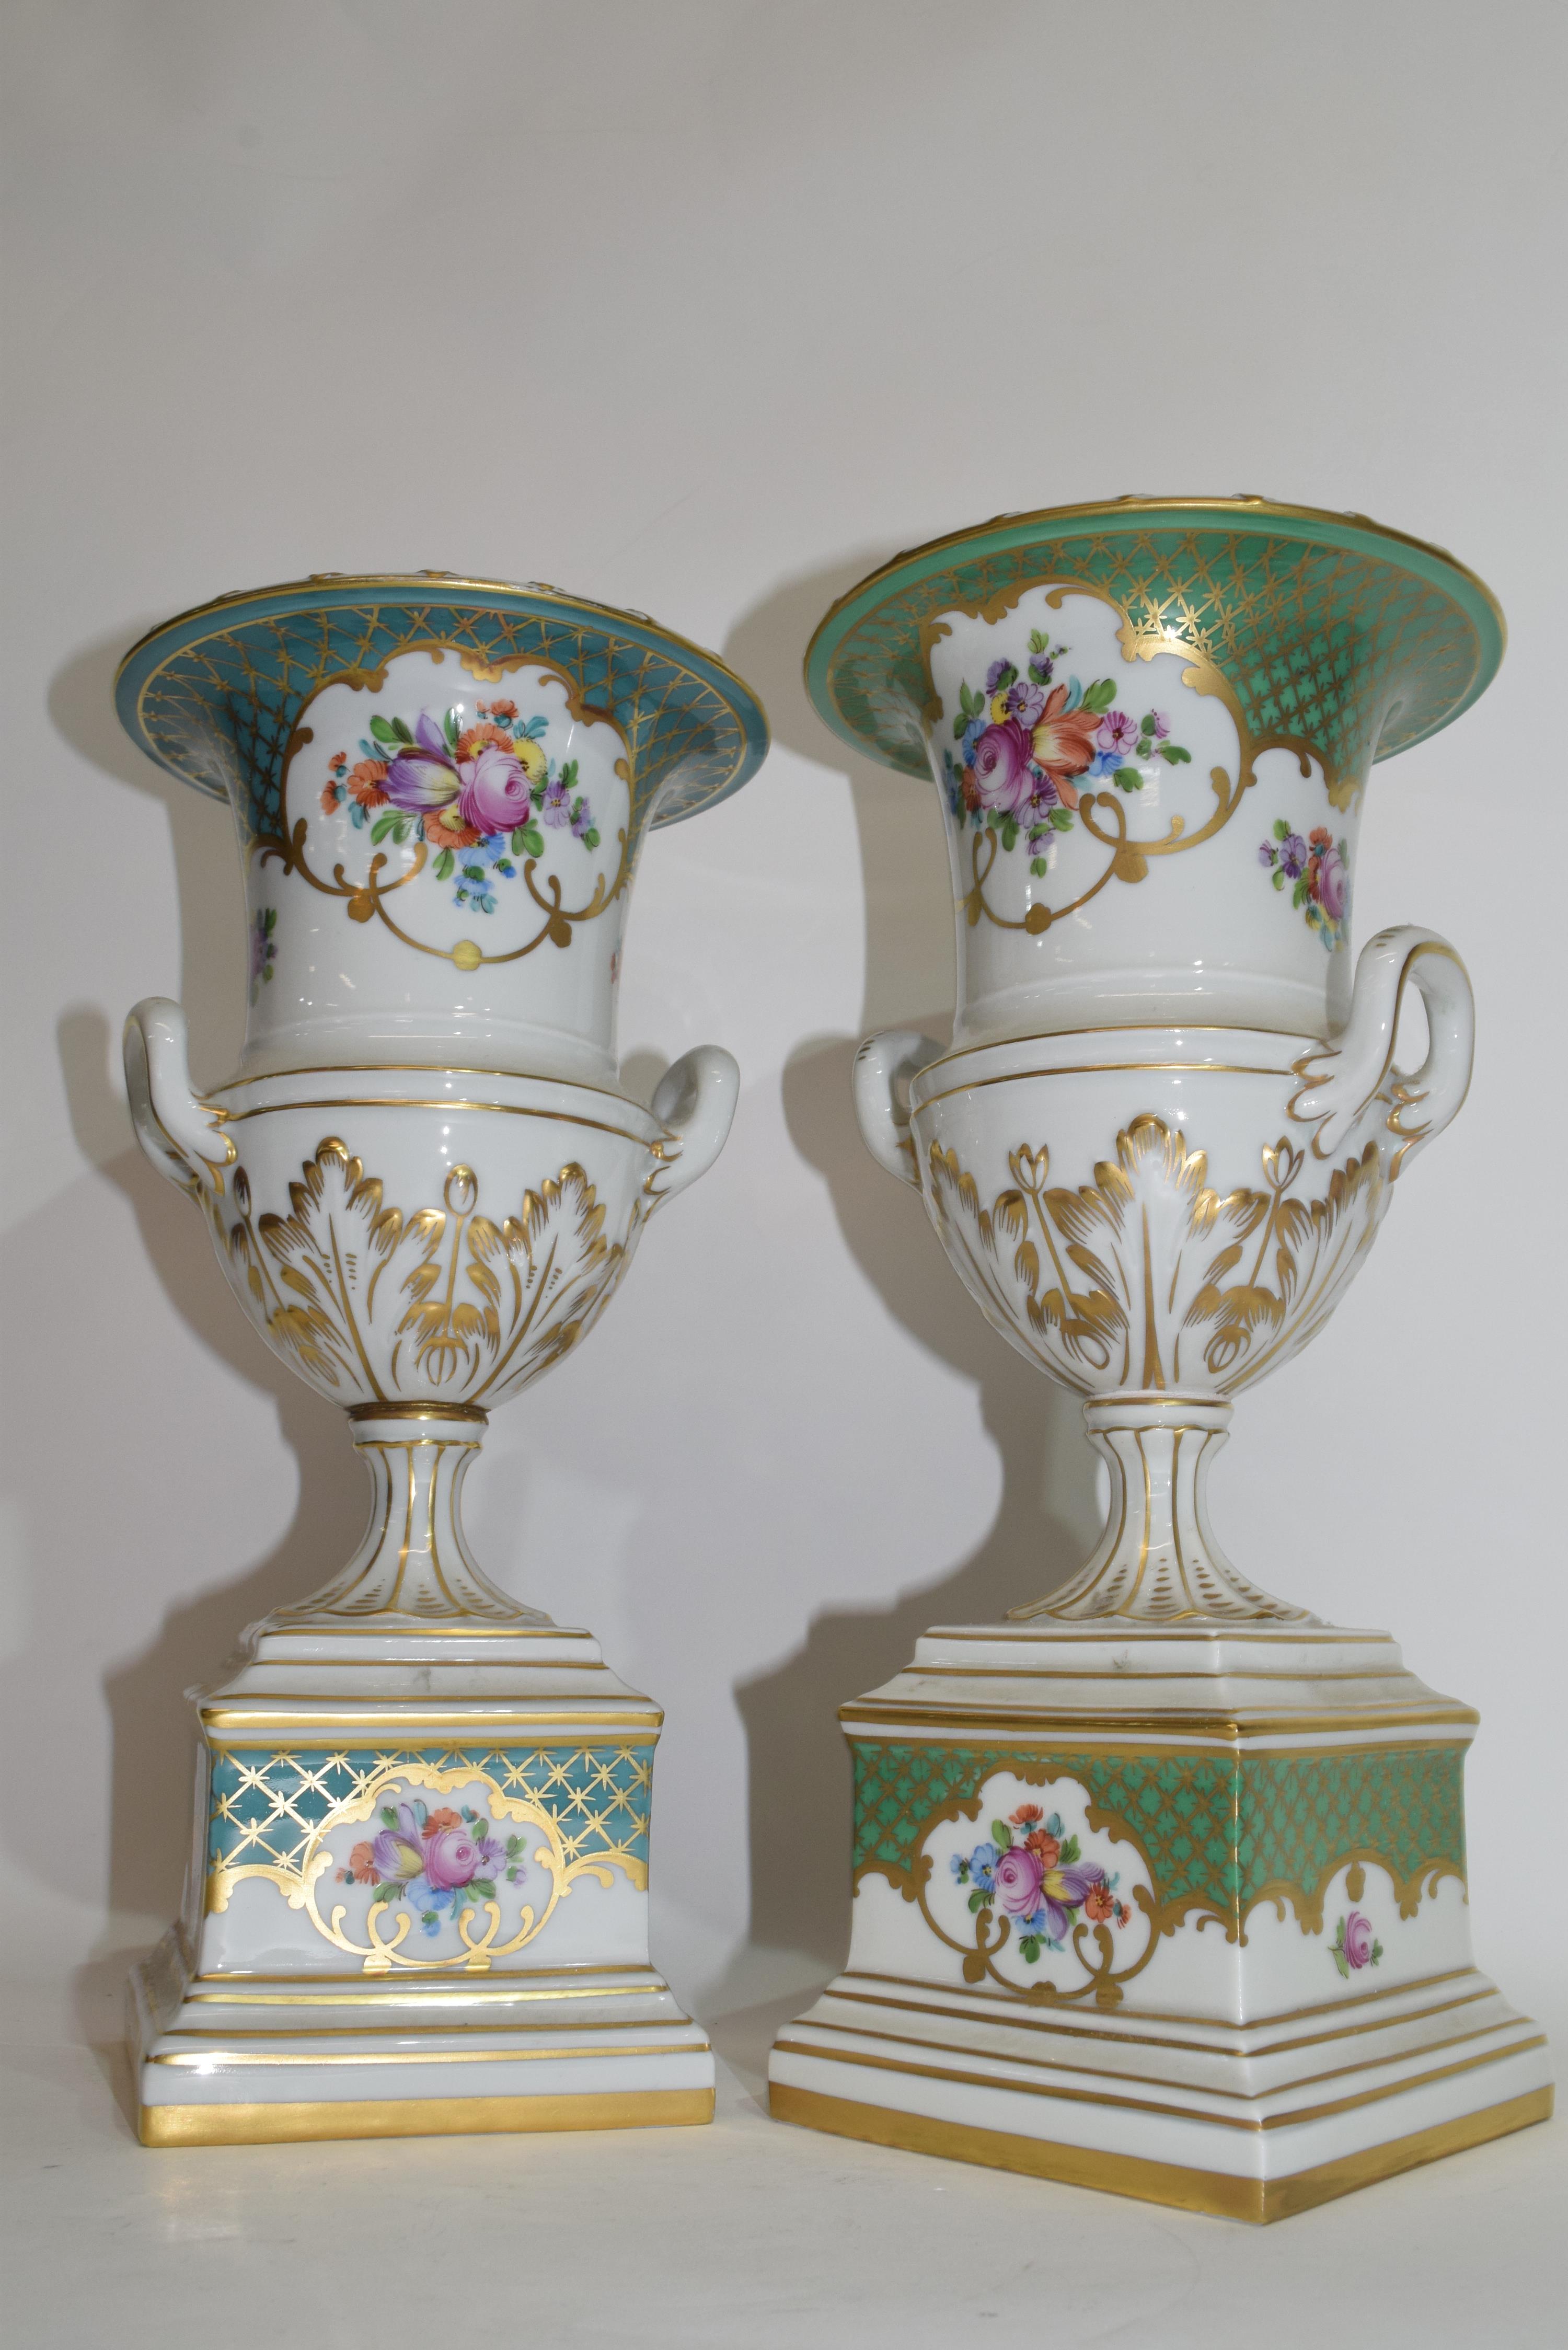 Pair of Continental porcelain vases decorated in Meissen style with floral sprays, 30cm high (2) - Image 2 of 3